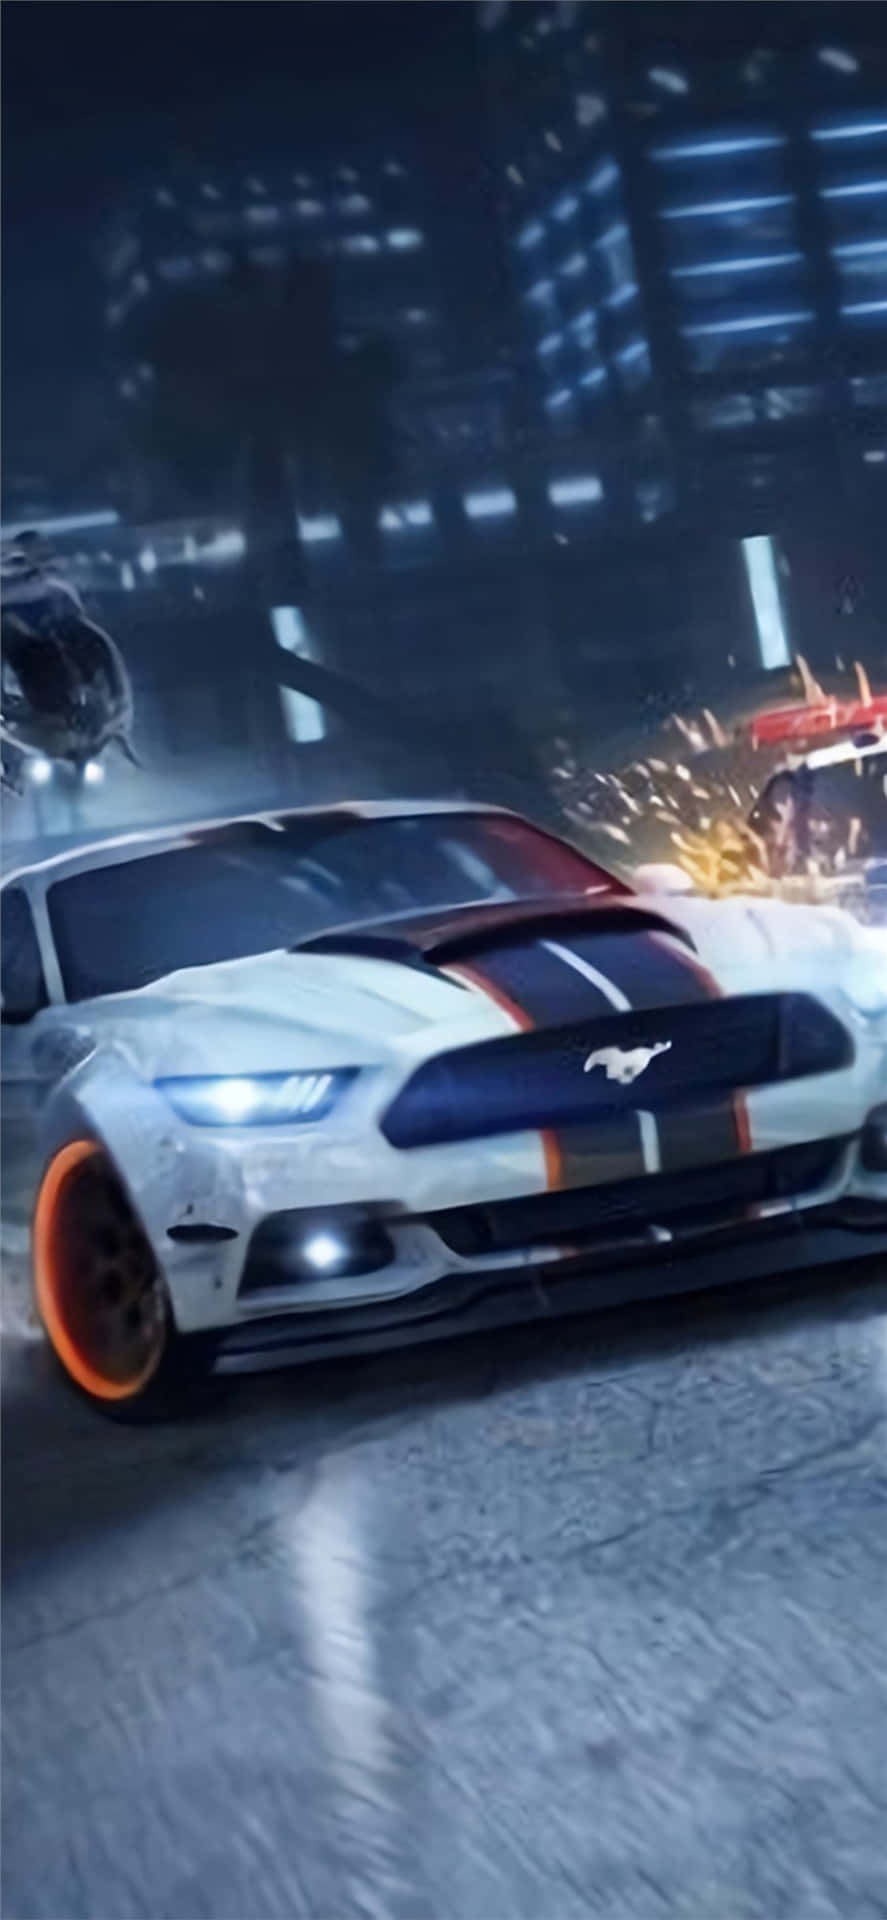 Iphonexs Need For Speed Payback Bakgrund Vit Mustang.